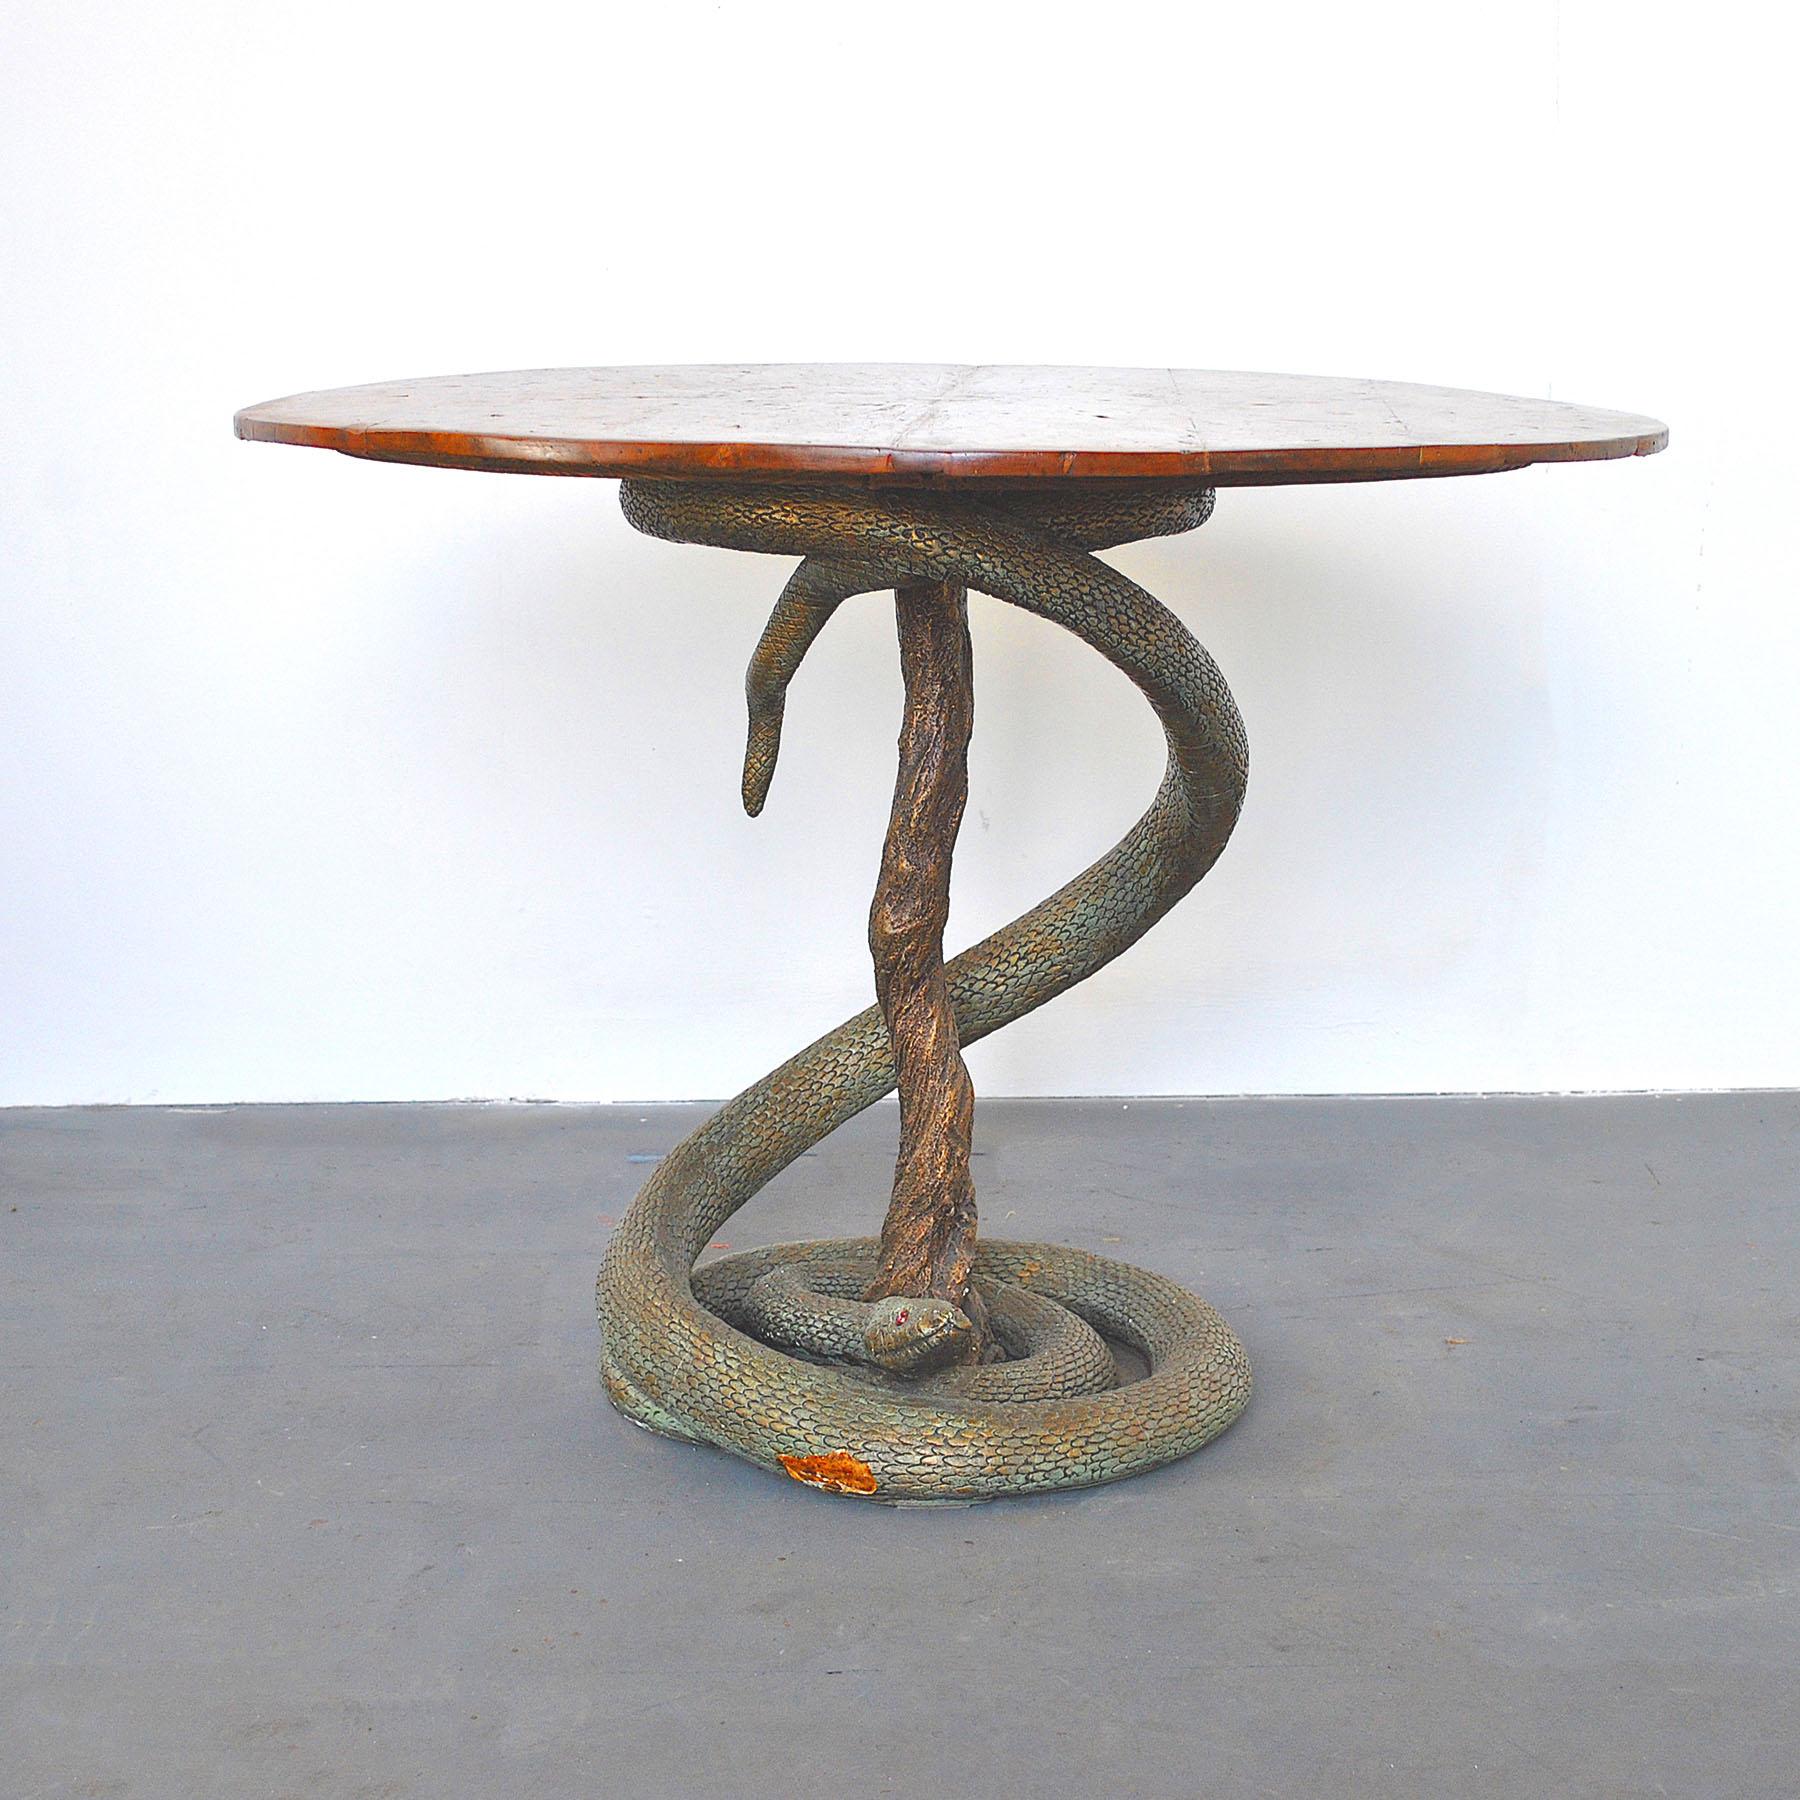 Gesso Eclectic Game Table with Python Sculpture from the Fifties For Sale